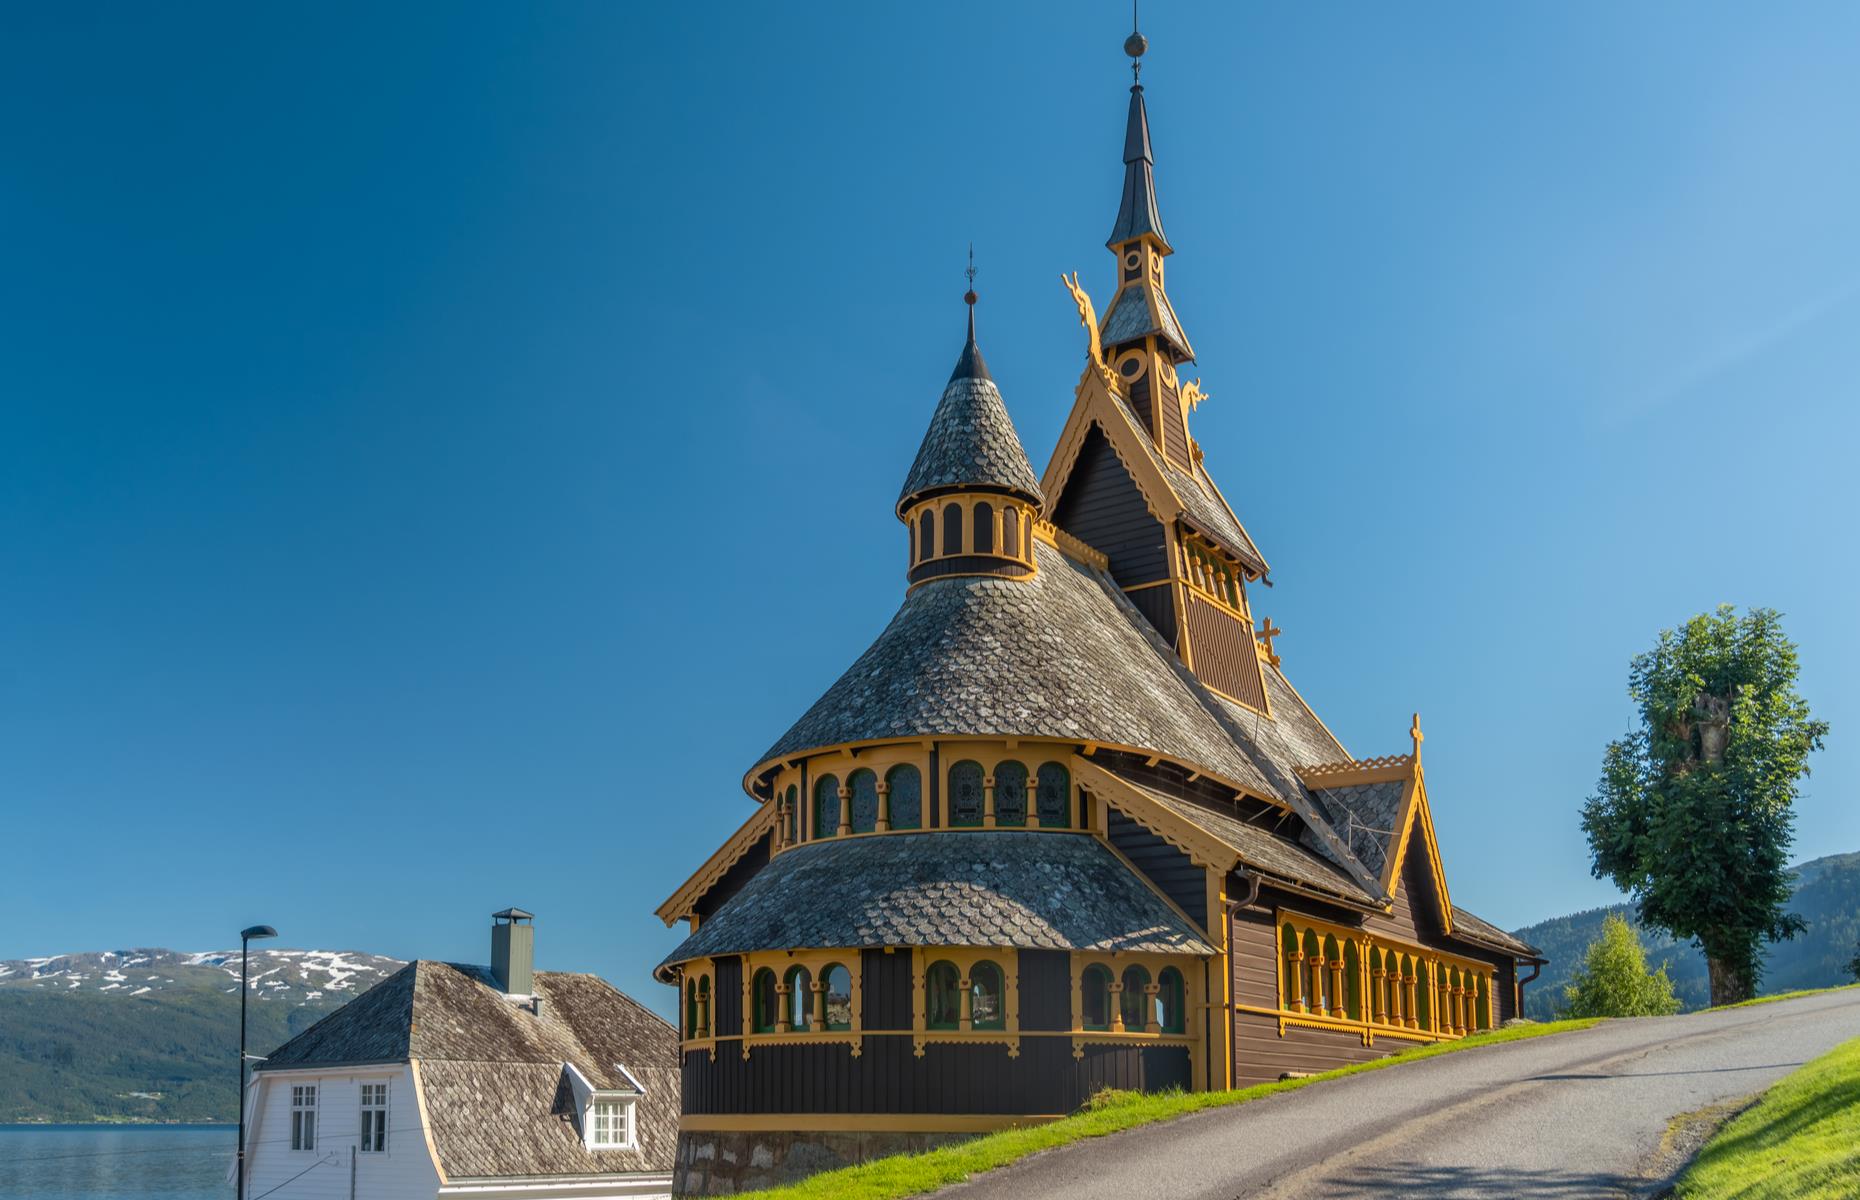 <p>Art director of <em>Frozen,</em> Michael Giaimo, travelled to Norway as part of his research for the icy tale. The country’s dramatic coastline, mountains and historic towns informed his vision for the kingdom of Arendelle, which sits on the banks of Arenfjord. Pretty stave church St Olaf's by the magical Sognefjord is one real-life location in the film, featuring as the chapel where Elsa is crowned queen. The 19th-century church didn’t just inspire the architecture, but also the name of everyone’s favorite snowman, Olaf.</p>